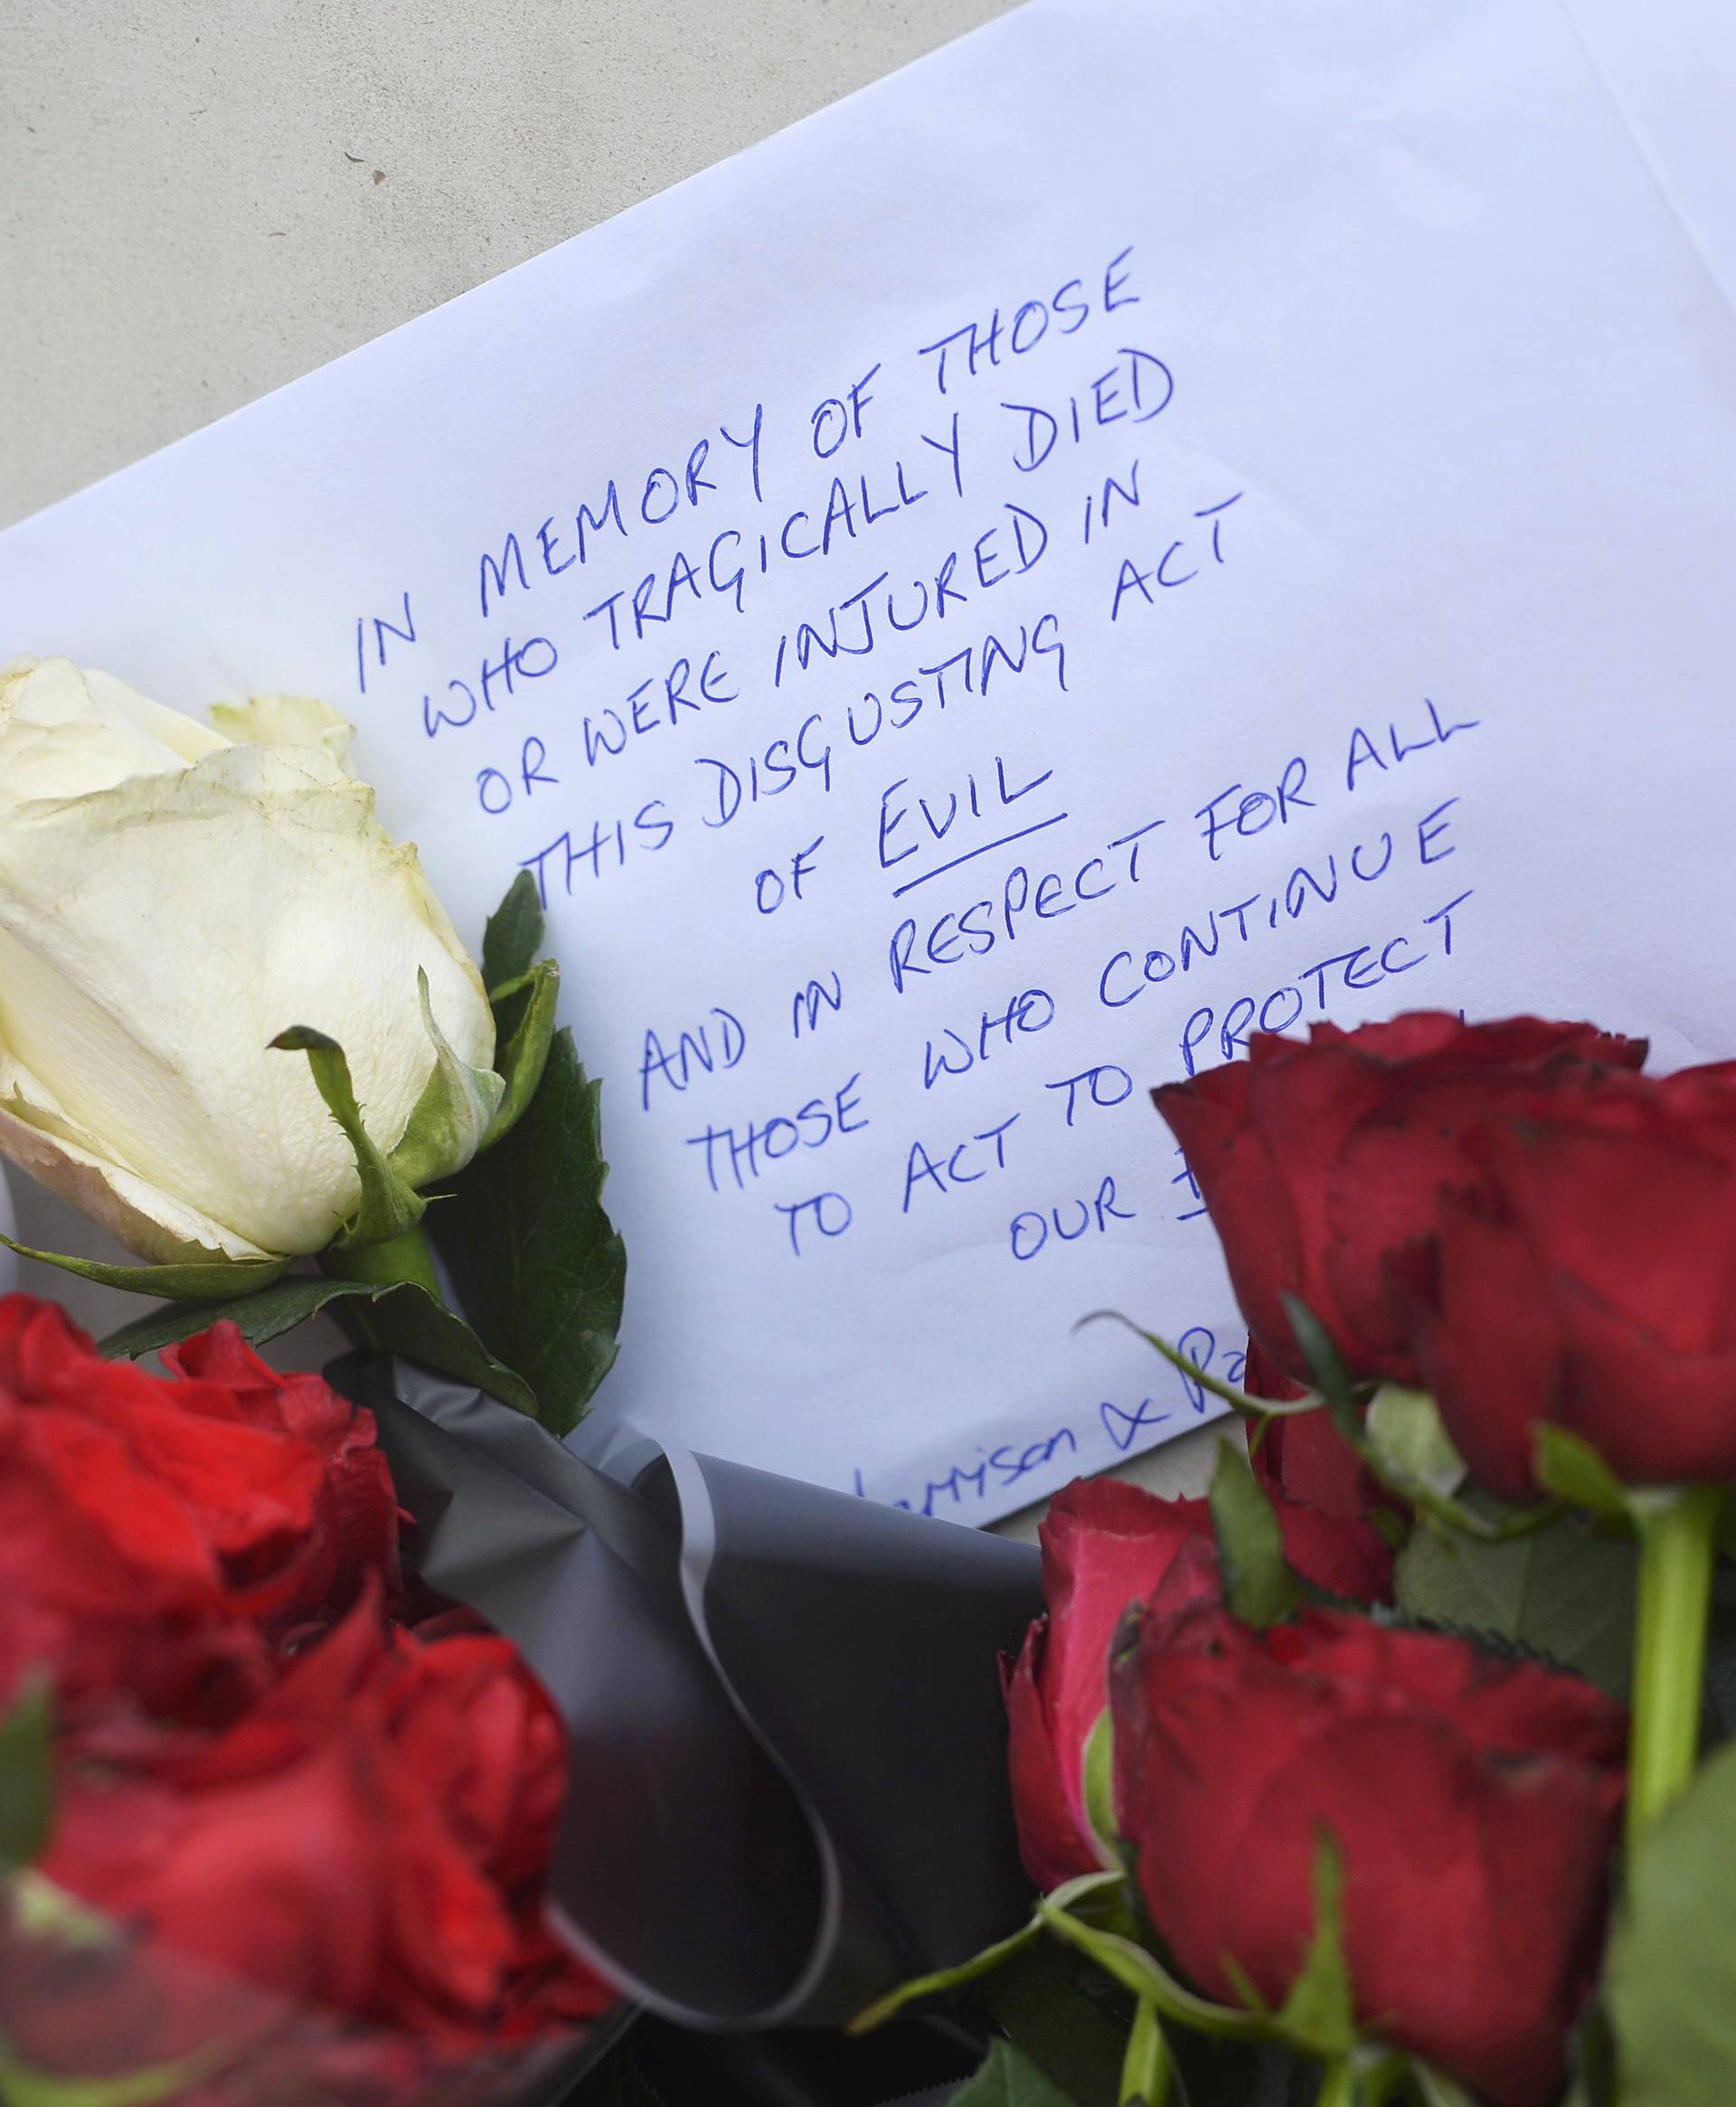 Flowers are left outside New Scotland Yard the morning after an attack in London